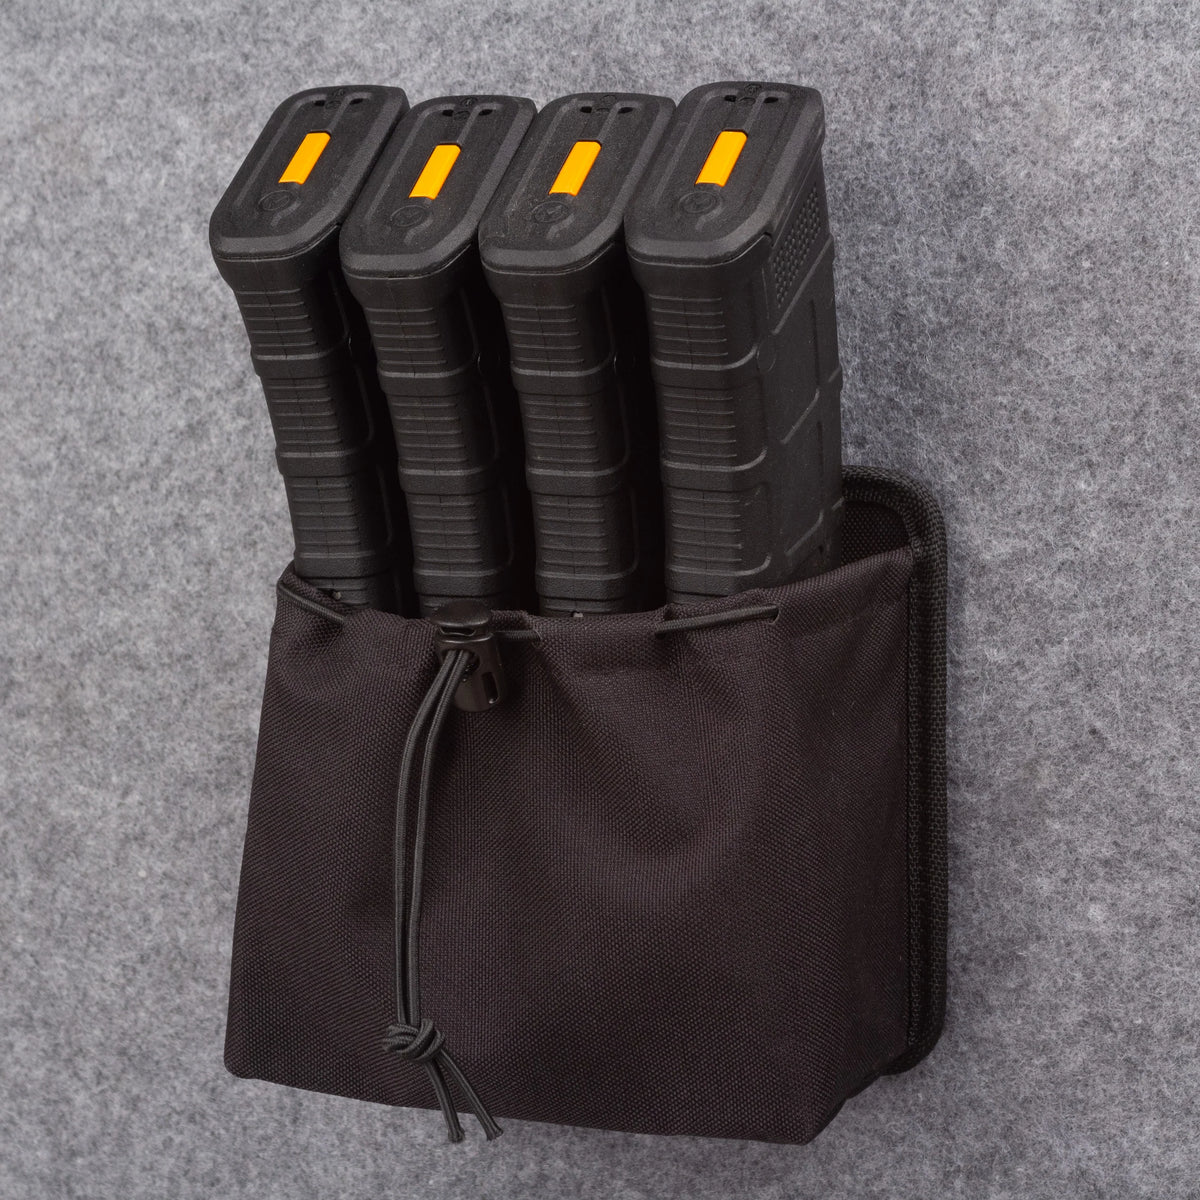 Tracker PG563 General Pocket with AK Mags